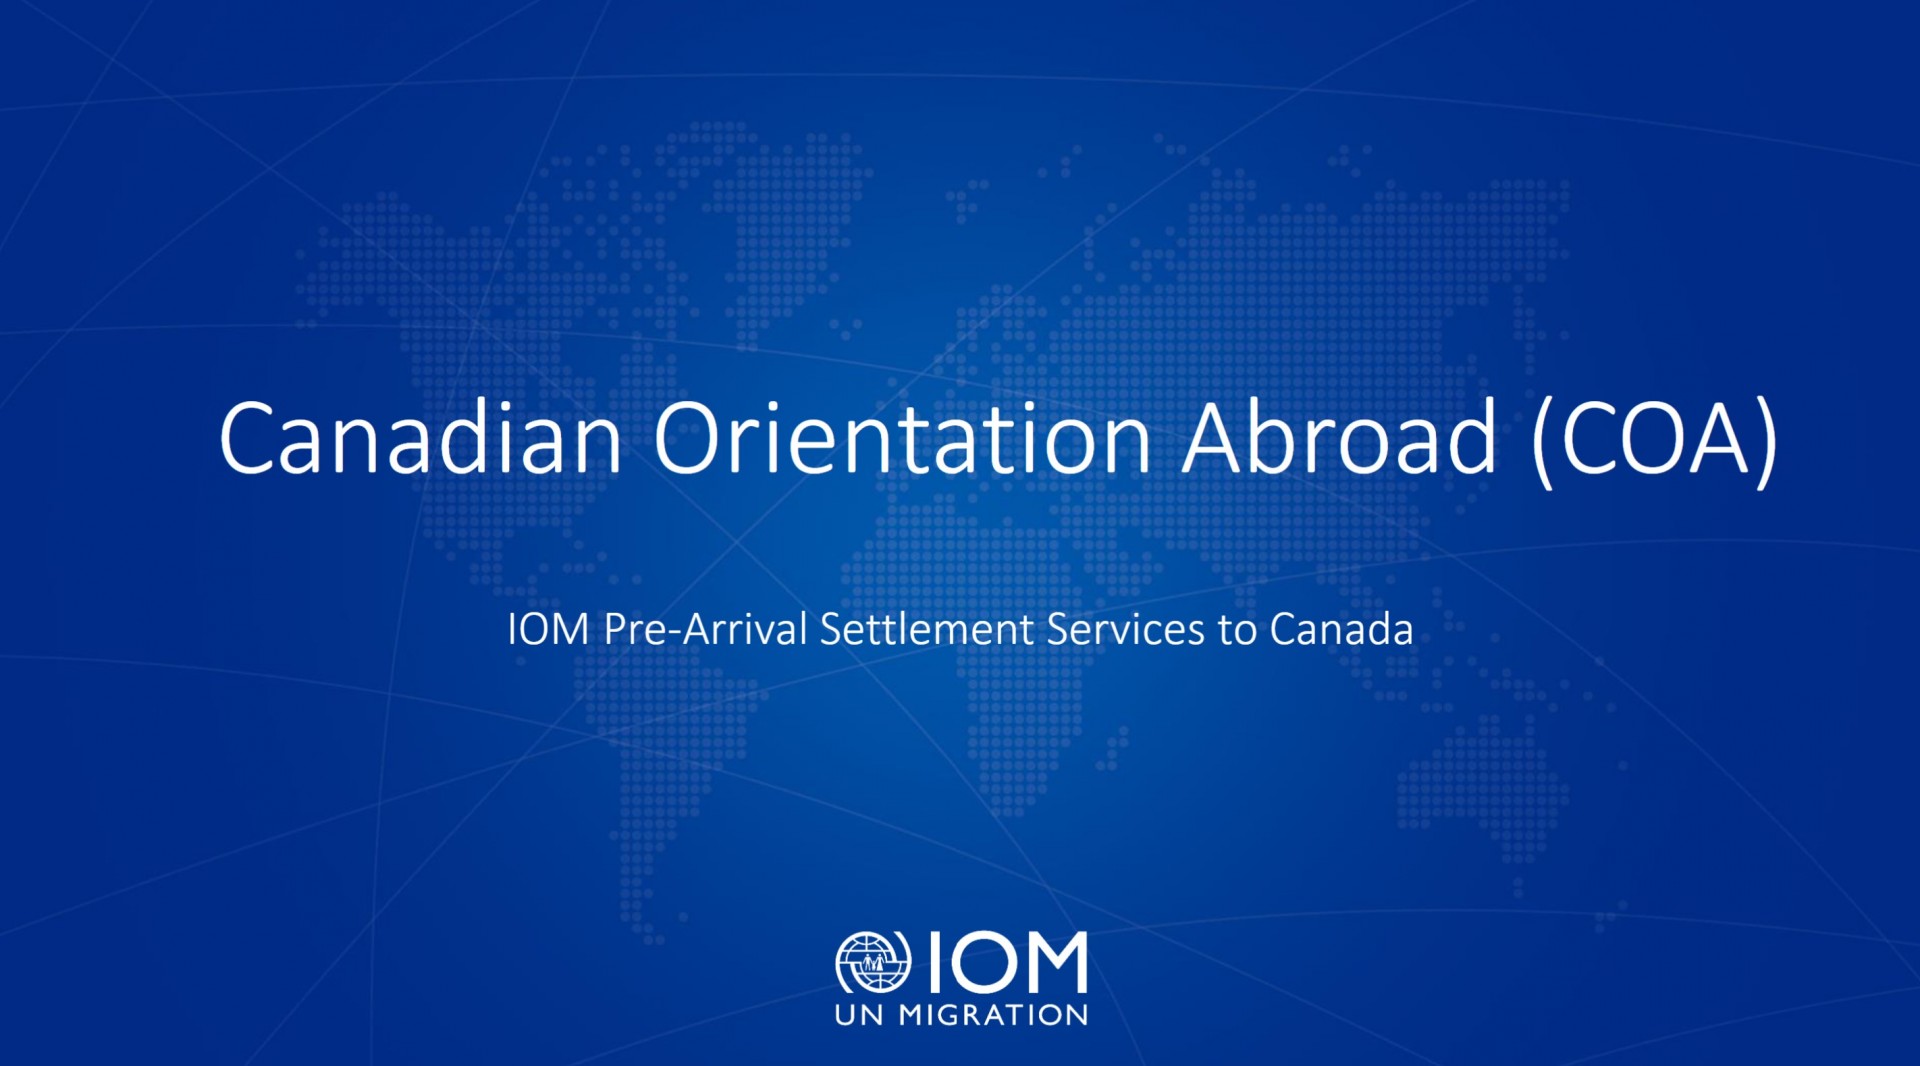 Overview of the Canadian Orientation Abroad Program – Ottawa, 9 June 2020